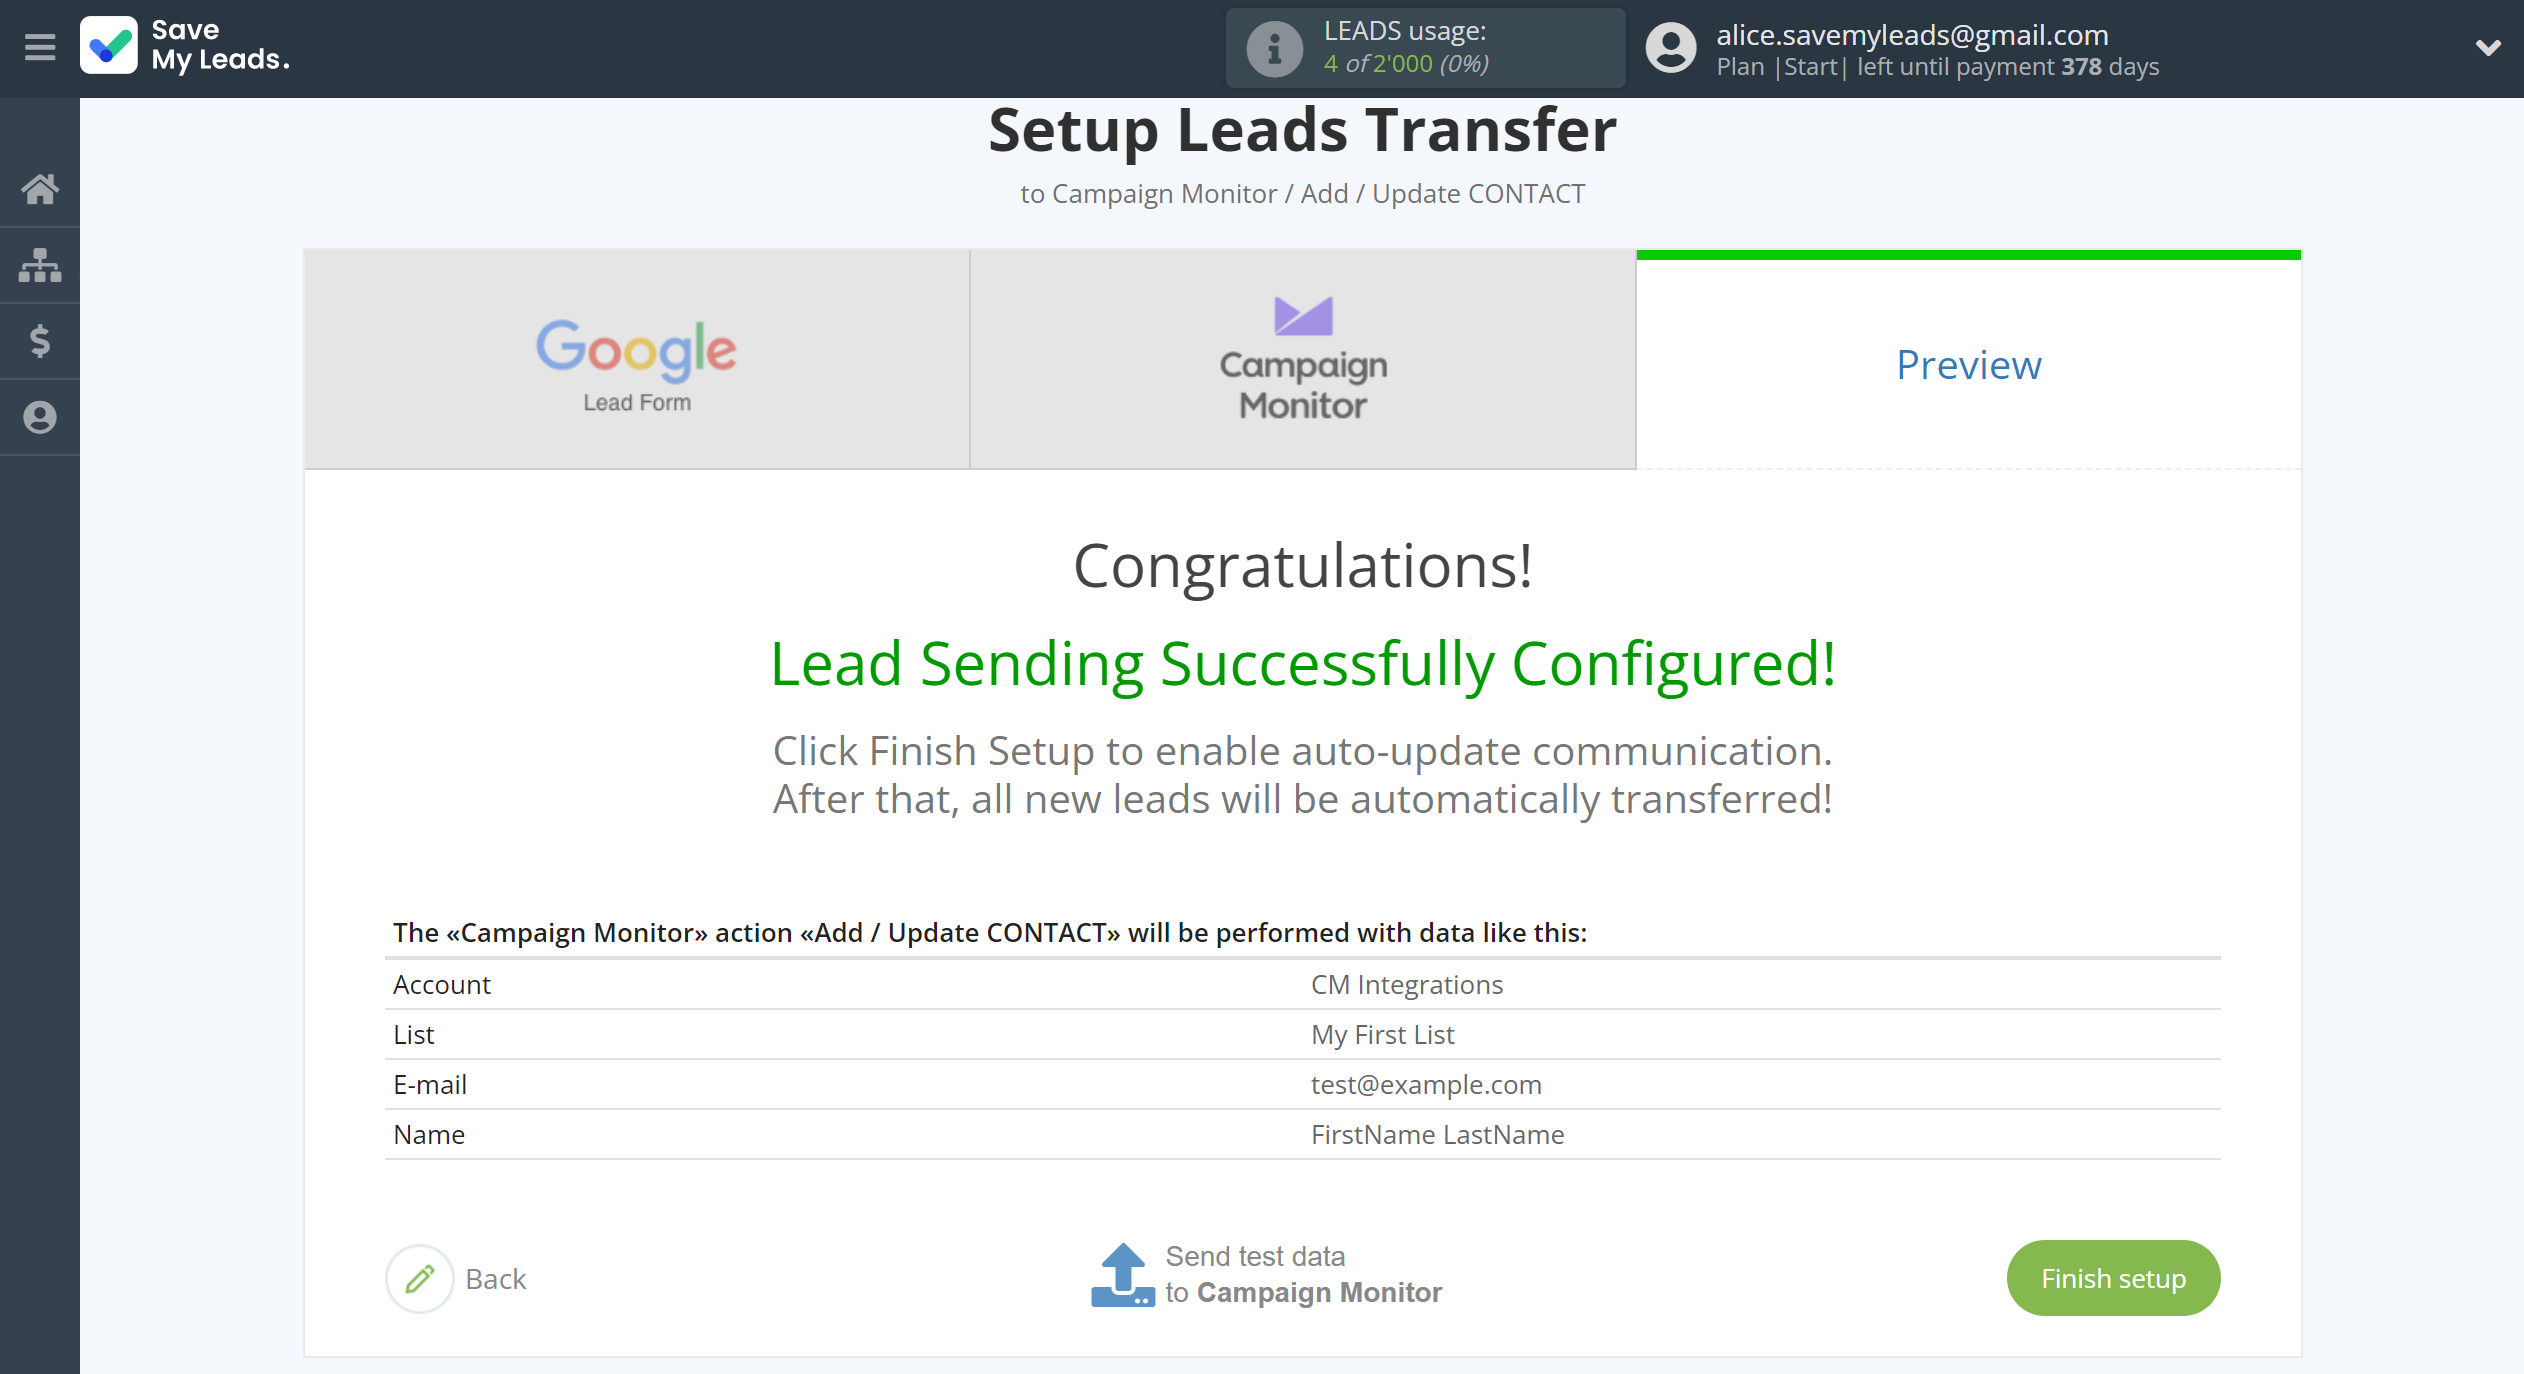 How to Connect Google Lead Form with Campaign Monitor | Test data